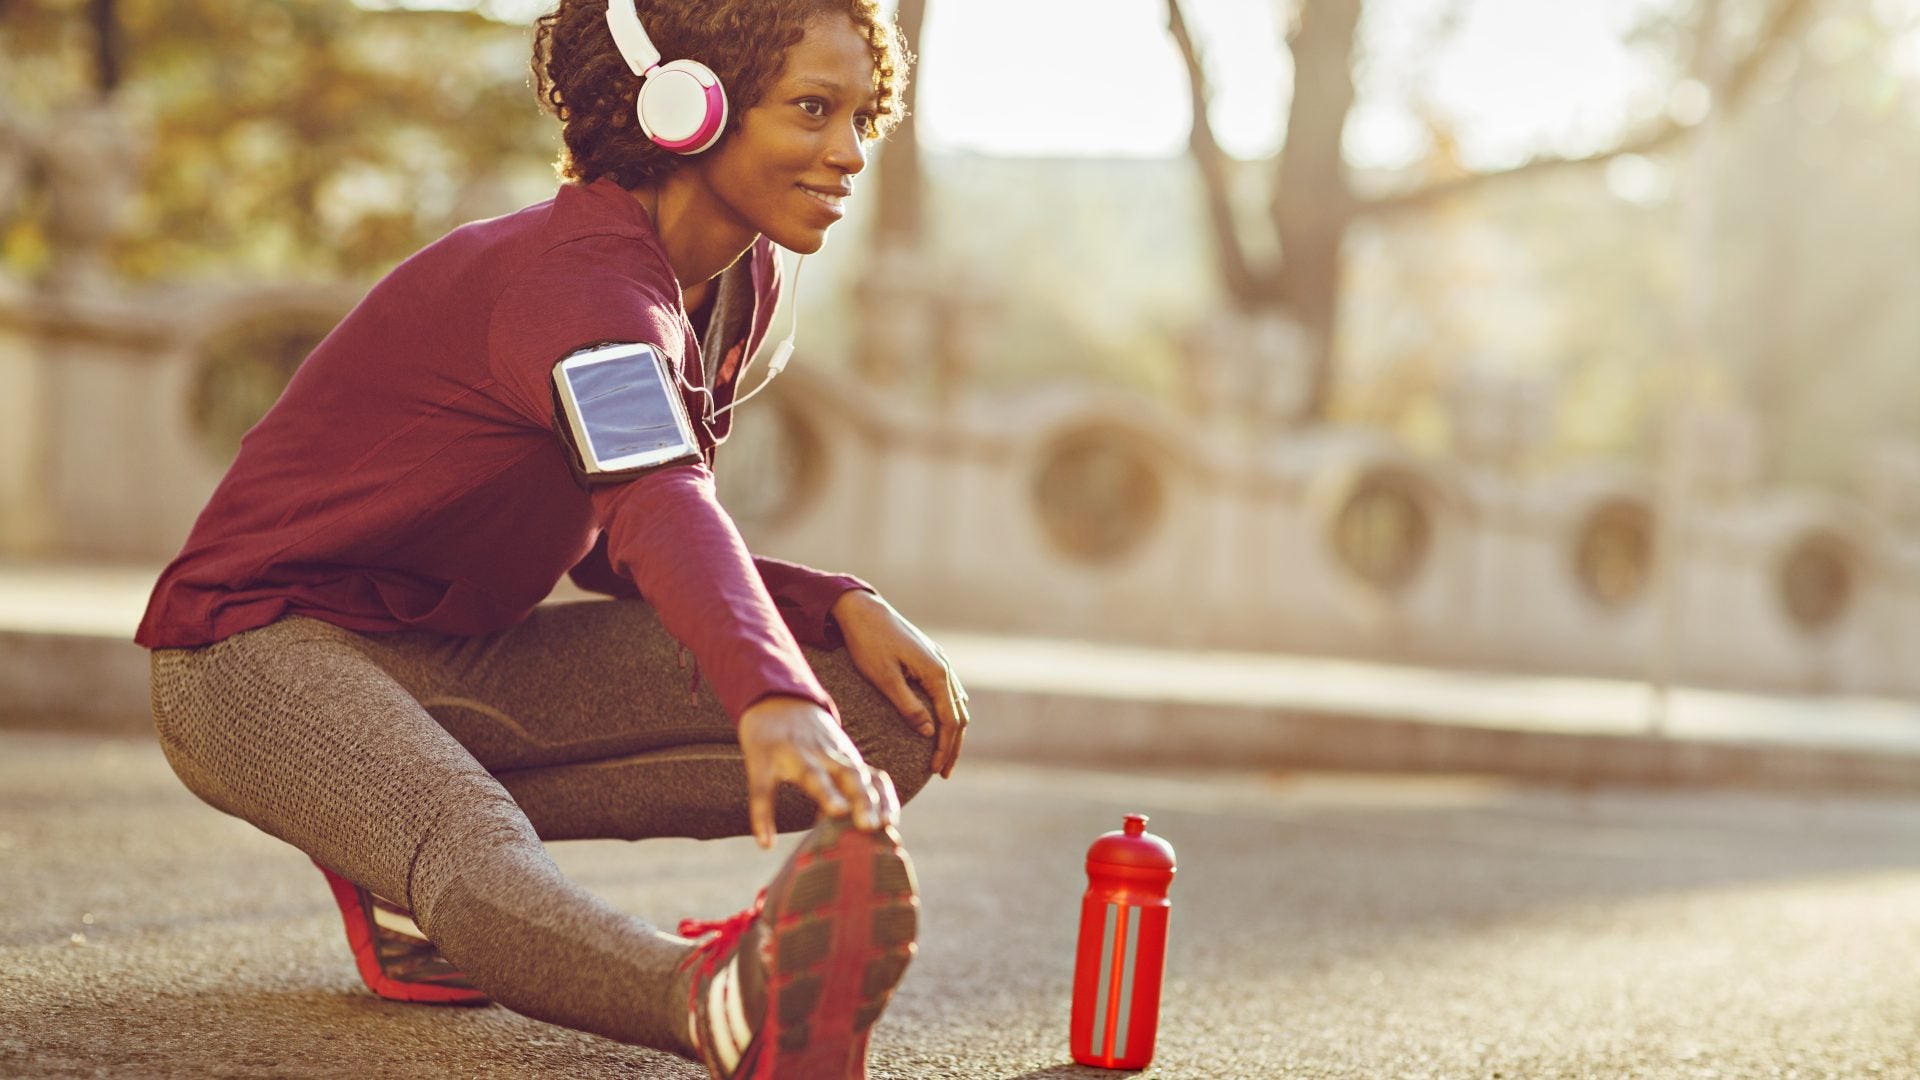 No More Excuses! Get A Good Workout In 20 Minutes Or Less With These 10 Fitness Apps